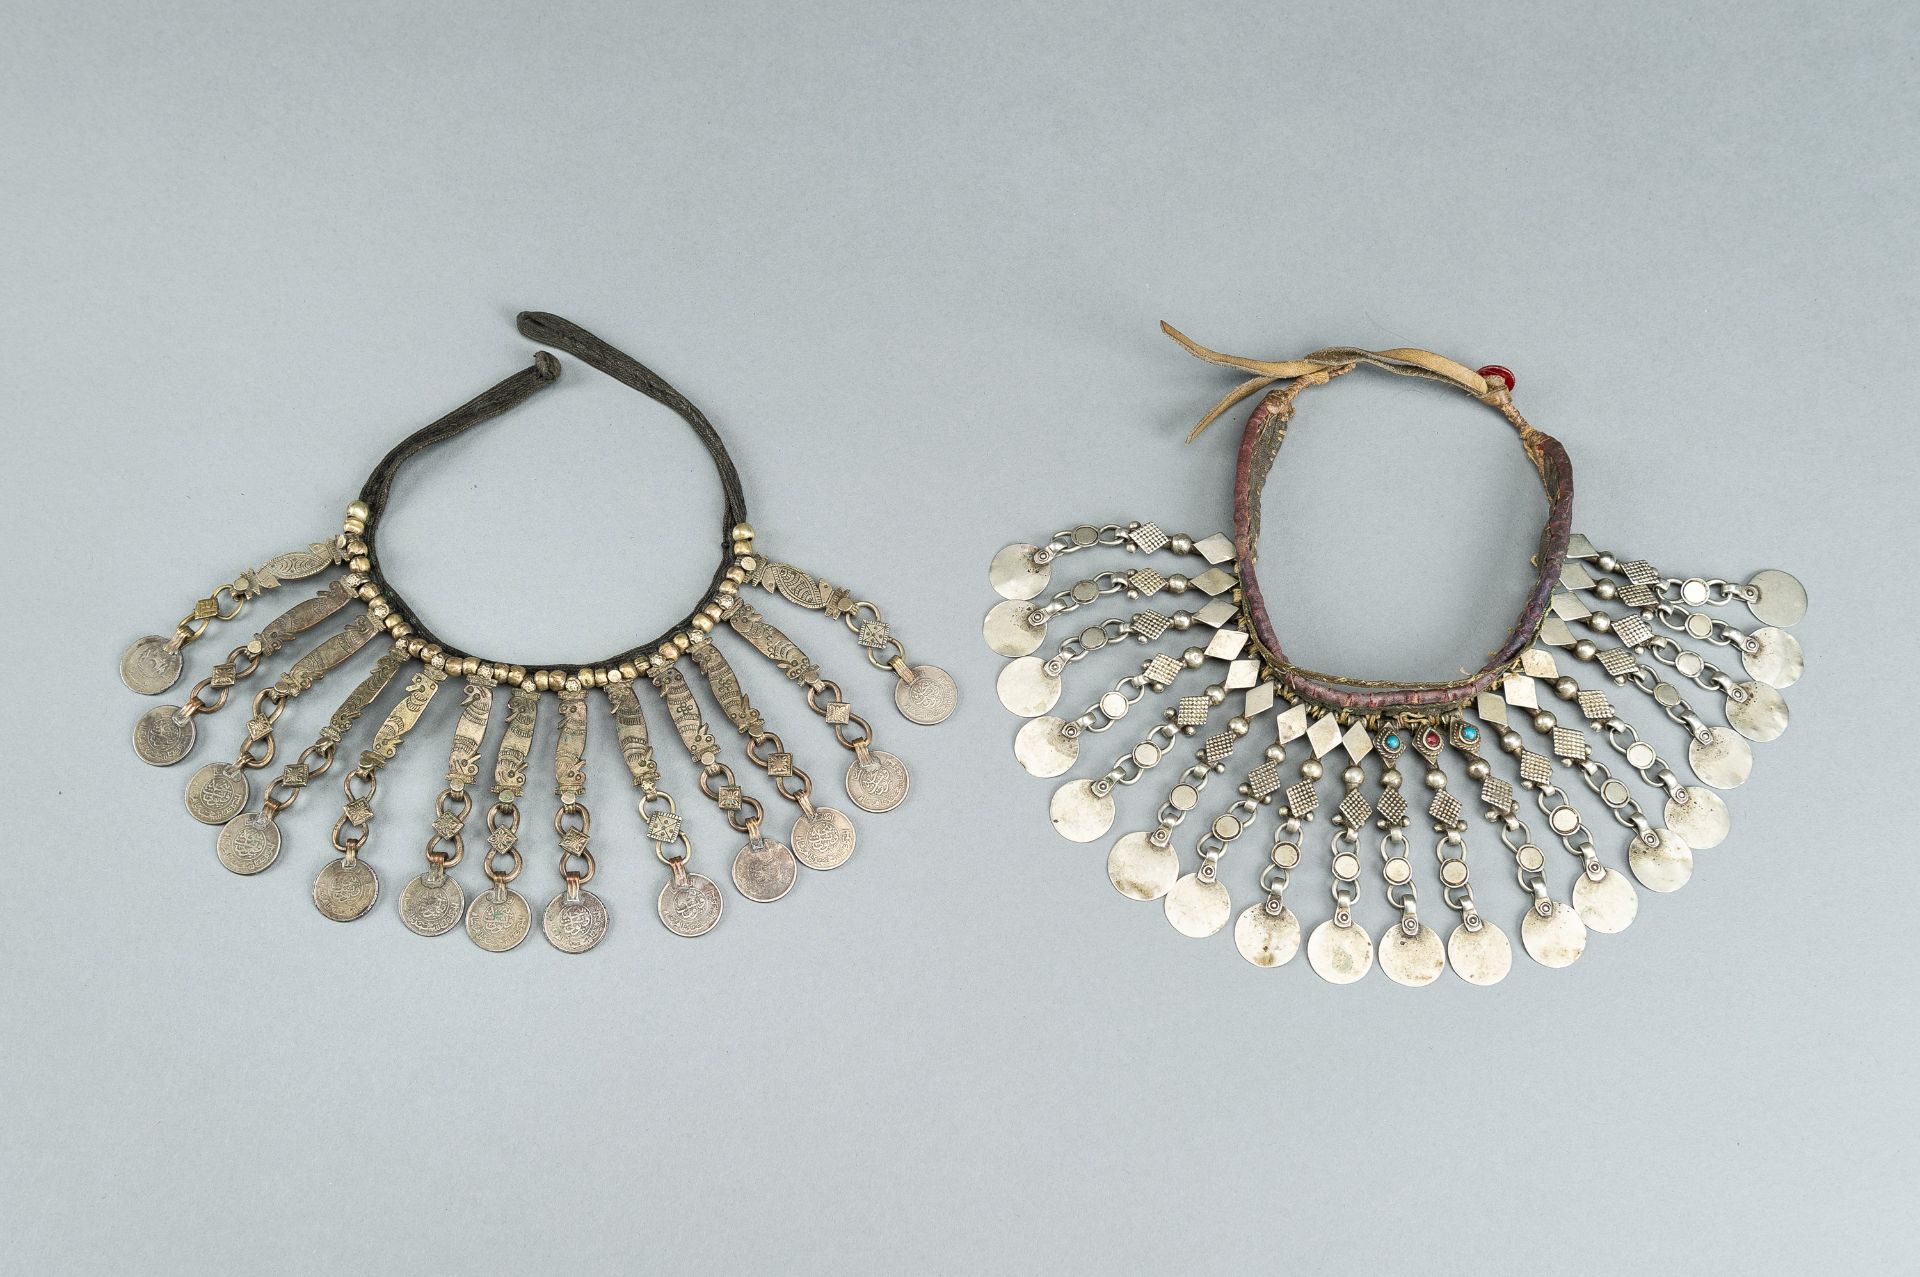 TWO TRIBAL SILVER AND METAL NECKLACES, ONE WITH AFGHAN COINS, c.1950s